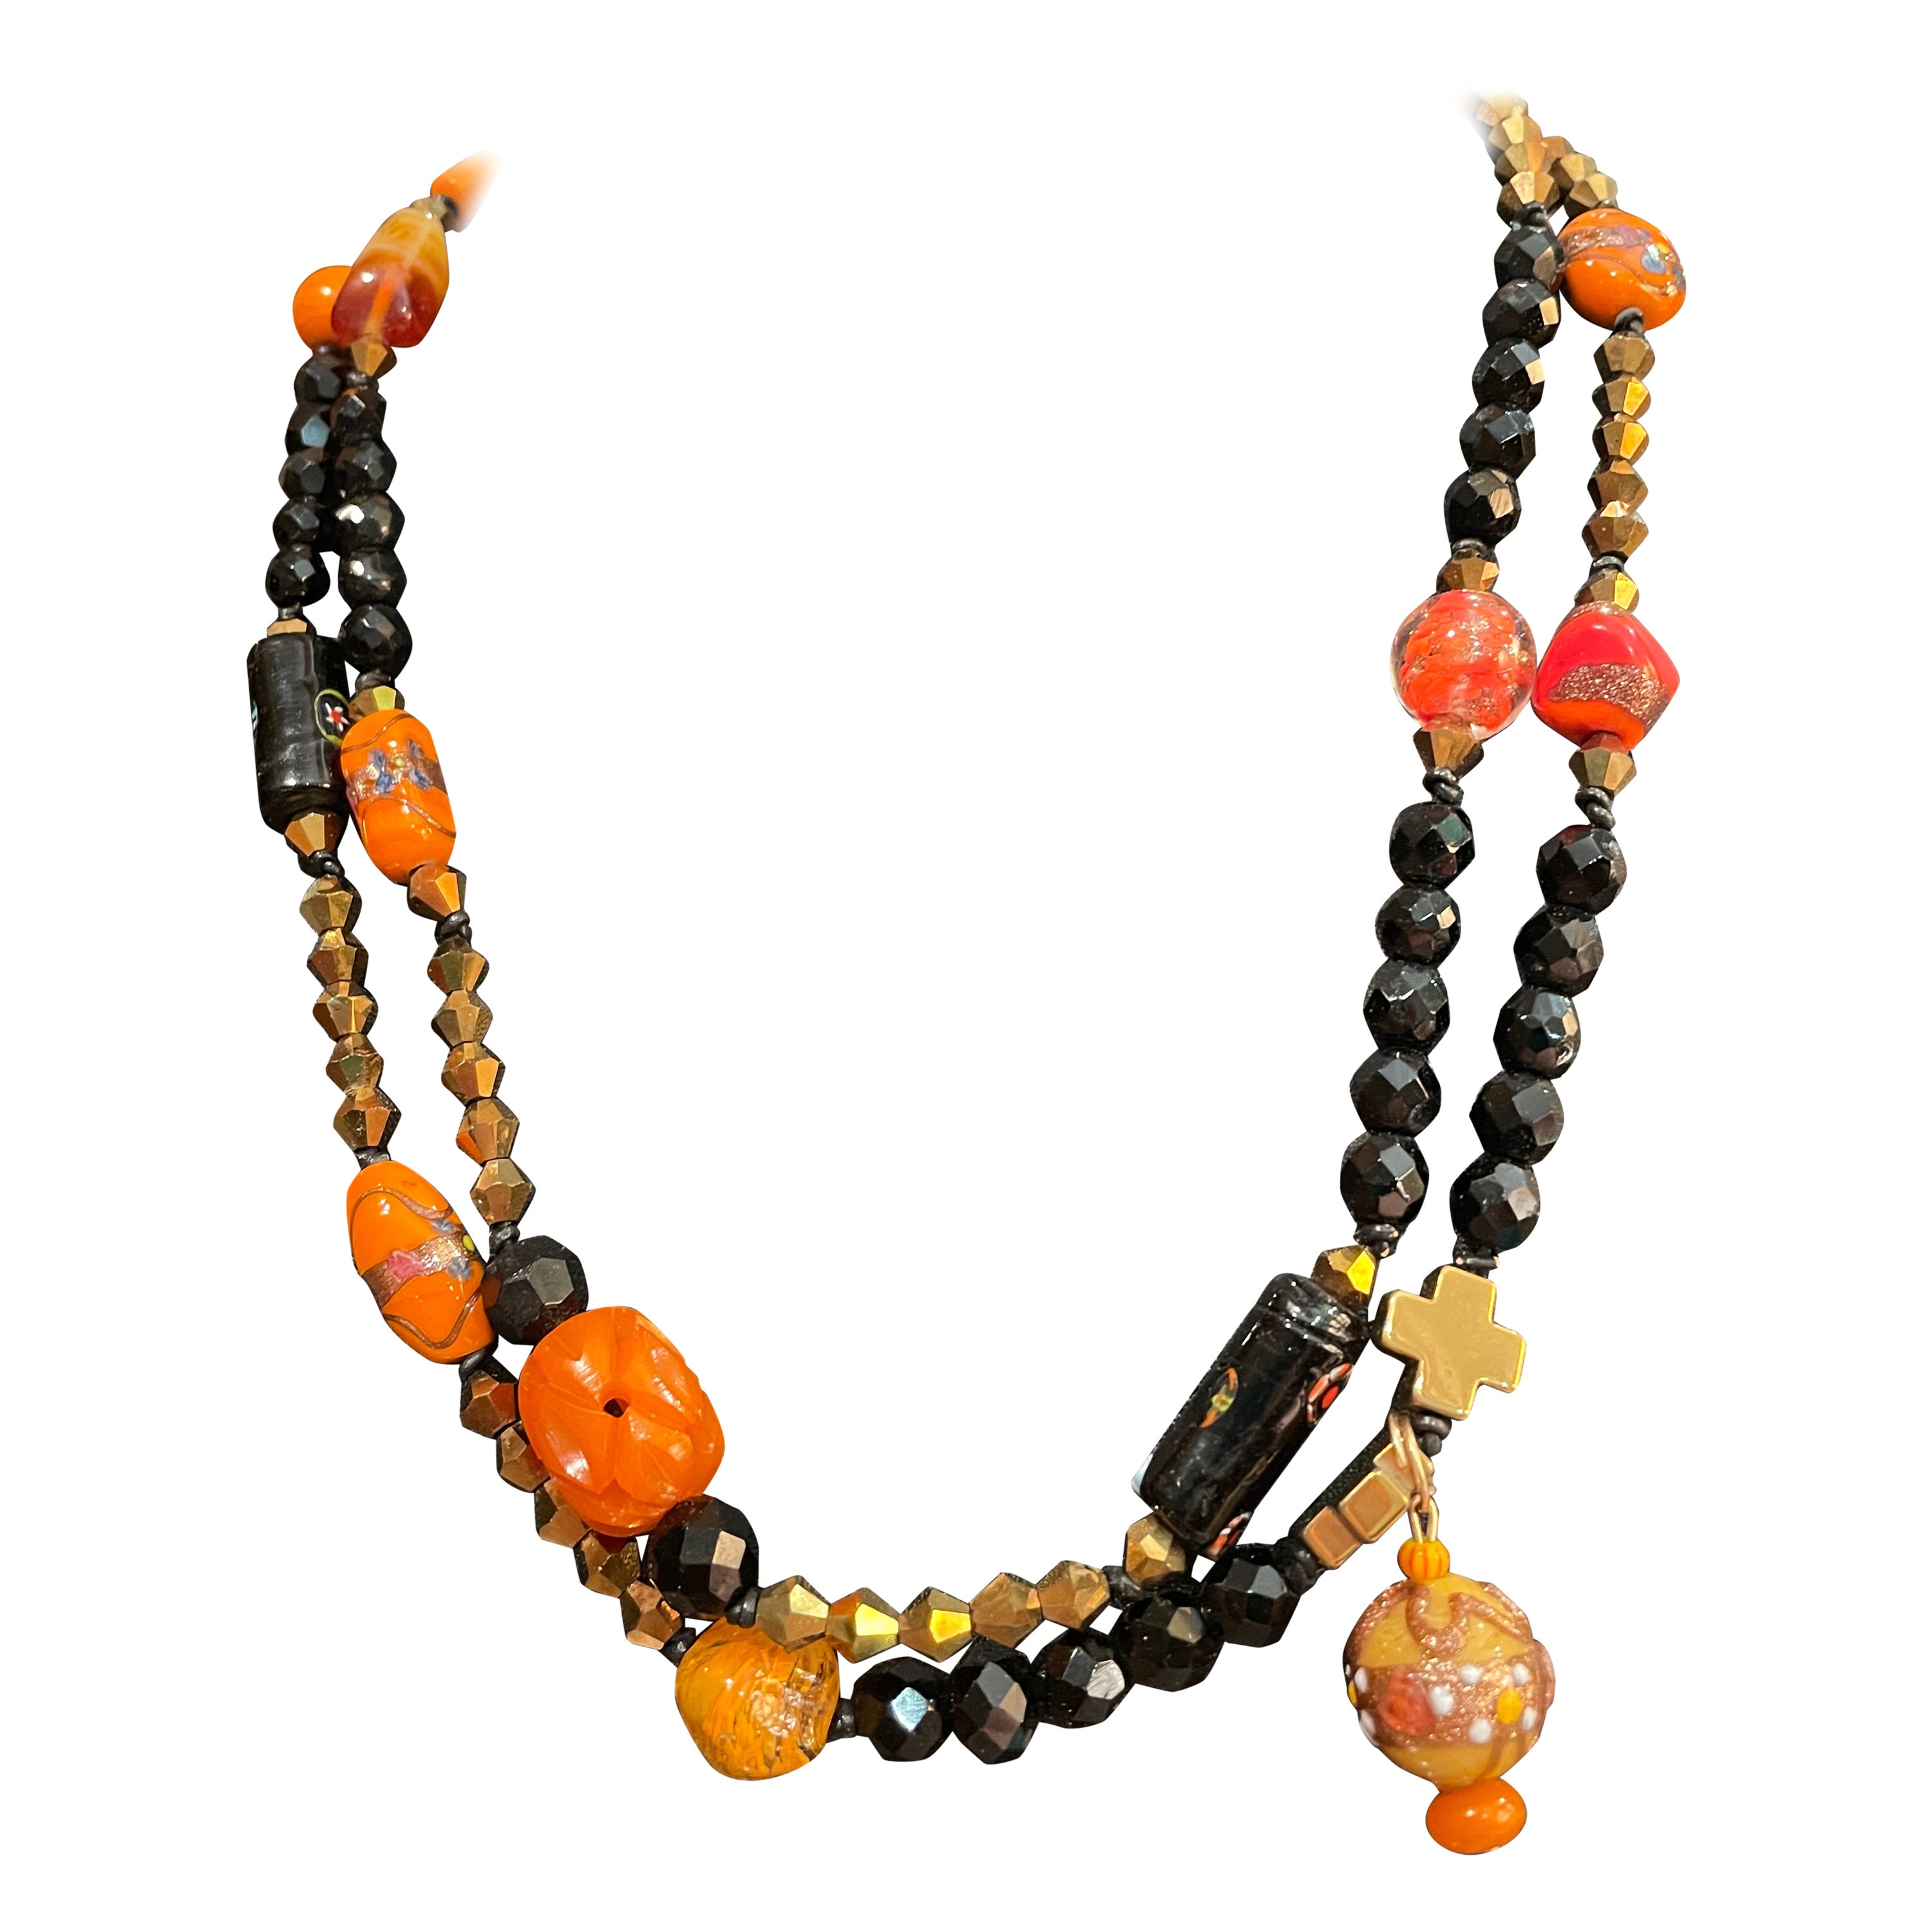 LB Vintage Murano Bakelite Jet agates one of a kind long strand necklace For Sale